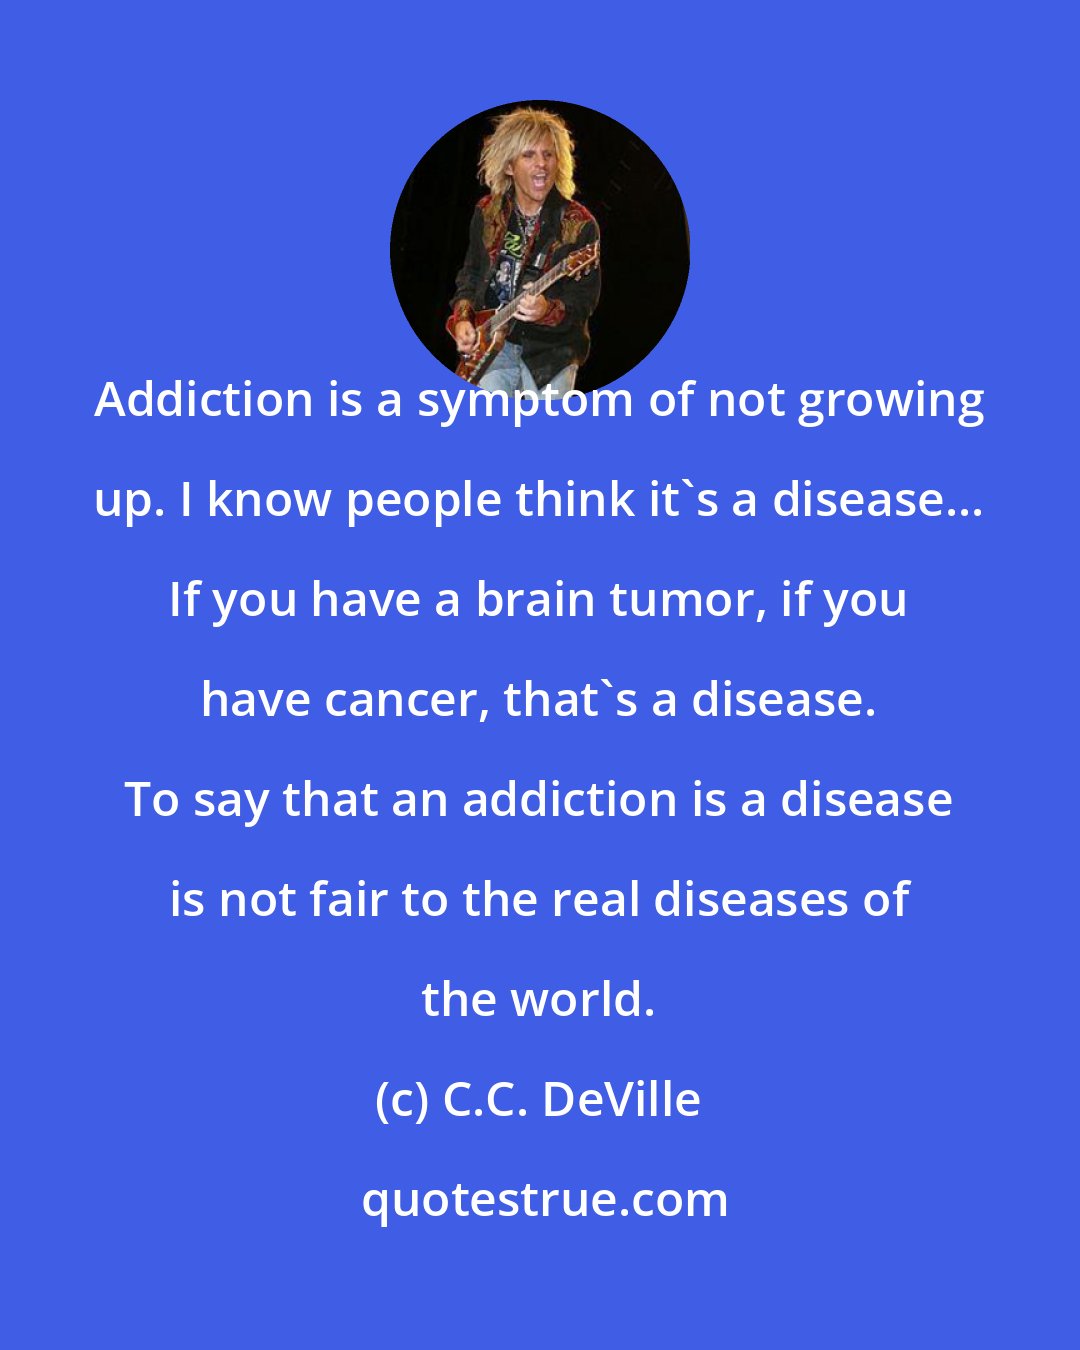 C.C. DeVille: Addiction is a symptom of not growing up. I know people think it's a disease... If you have a brain tumor, if you have cancer, that's a disease. To say that an addiction is a disease is not fair to the real diseases of the world.